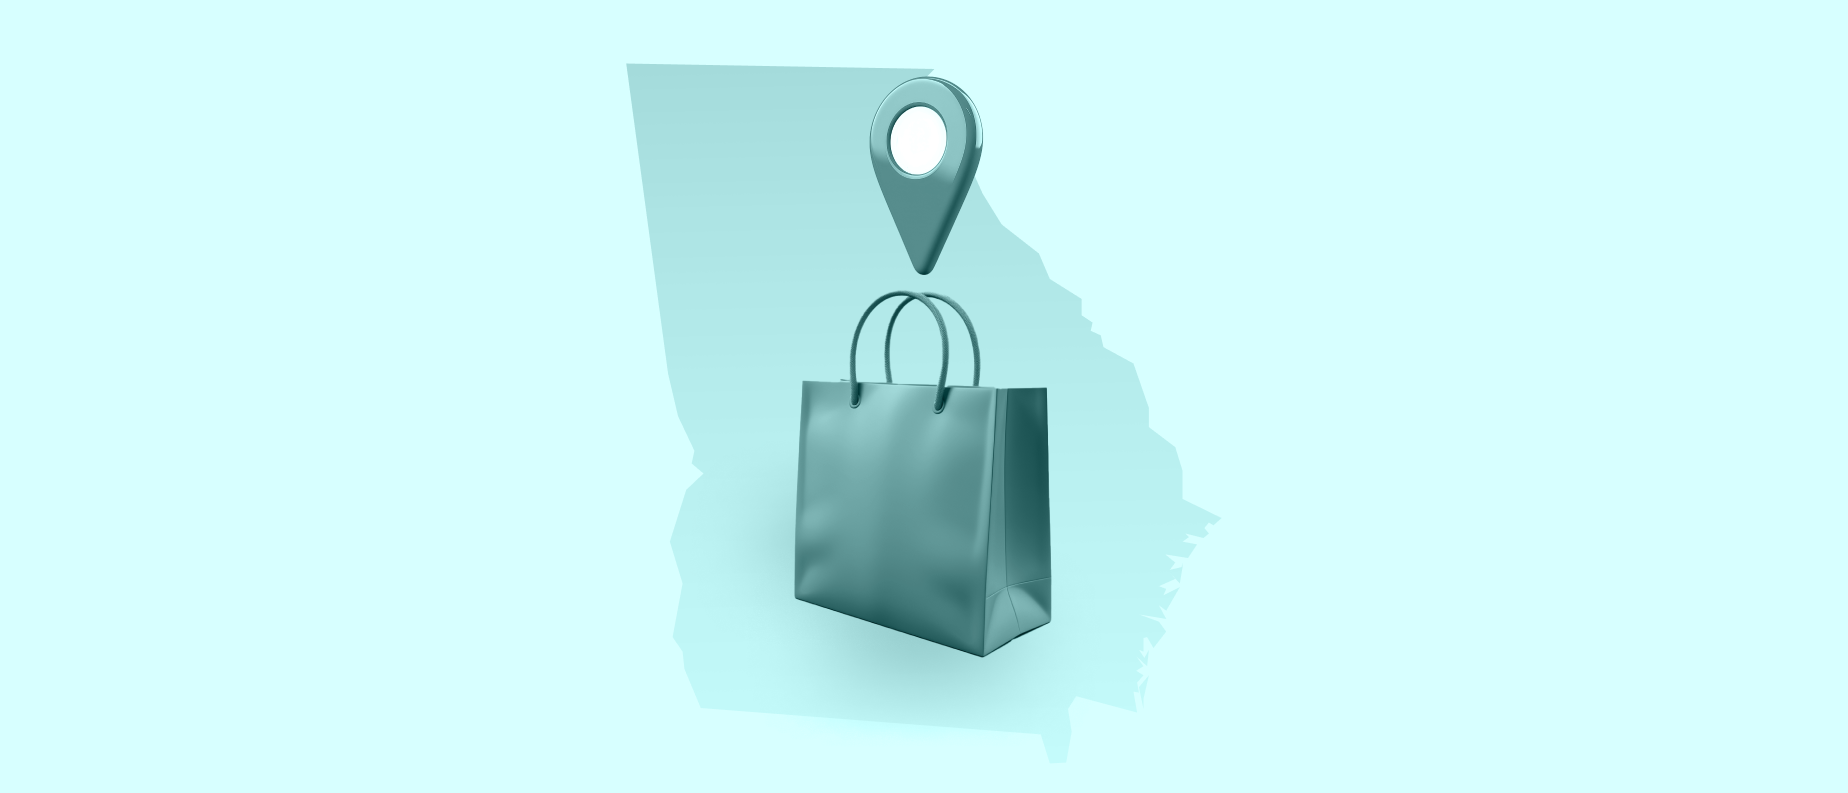 A blue outline of Georgia behind a blue shopping bag and location icon on a light blue background.